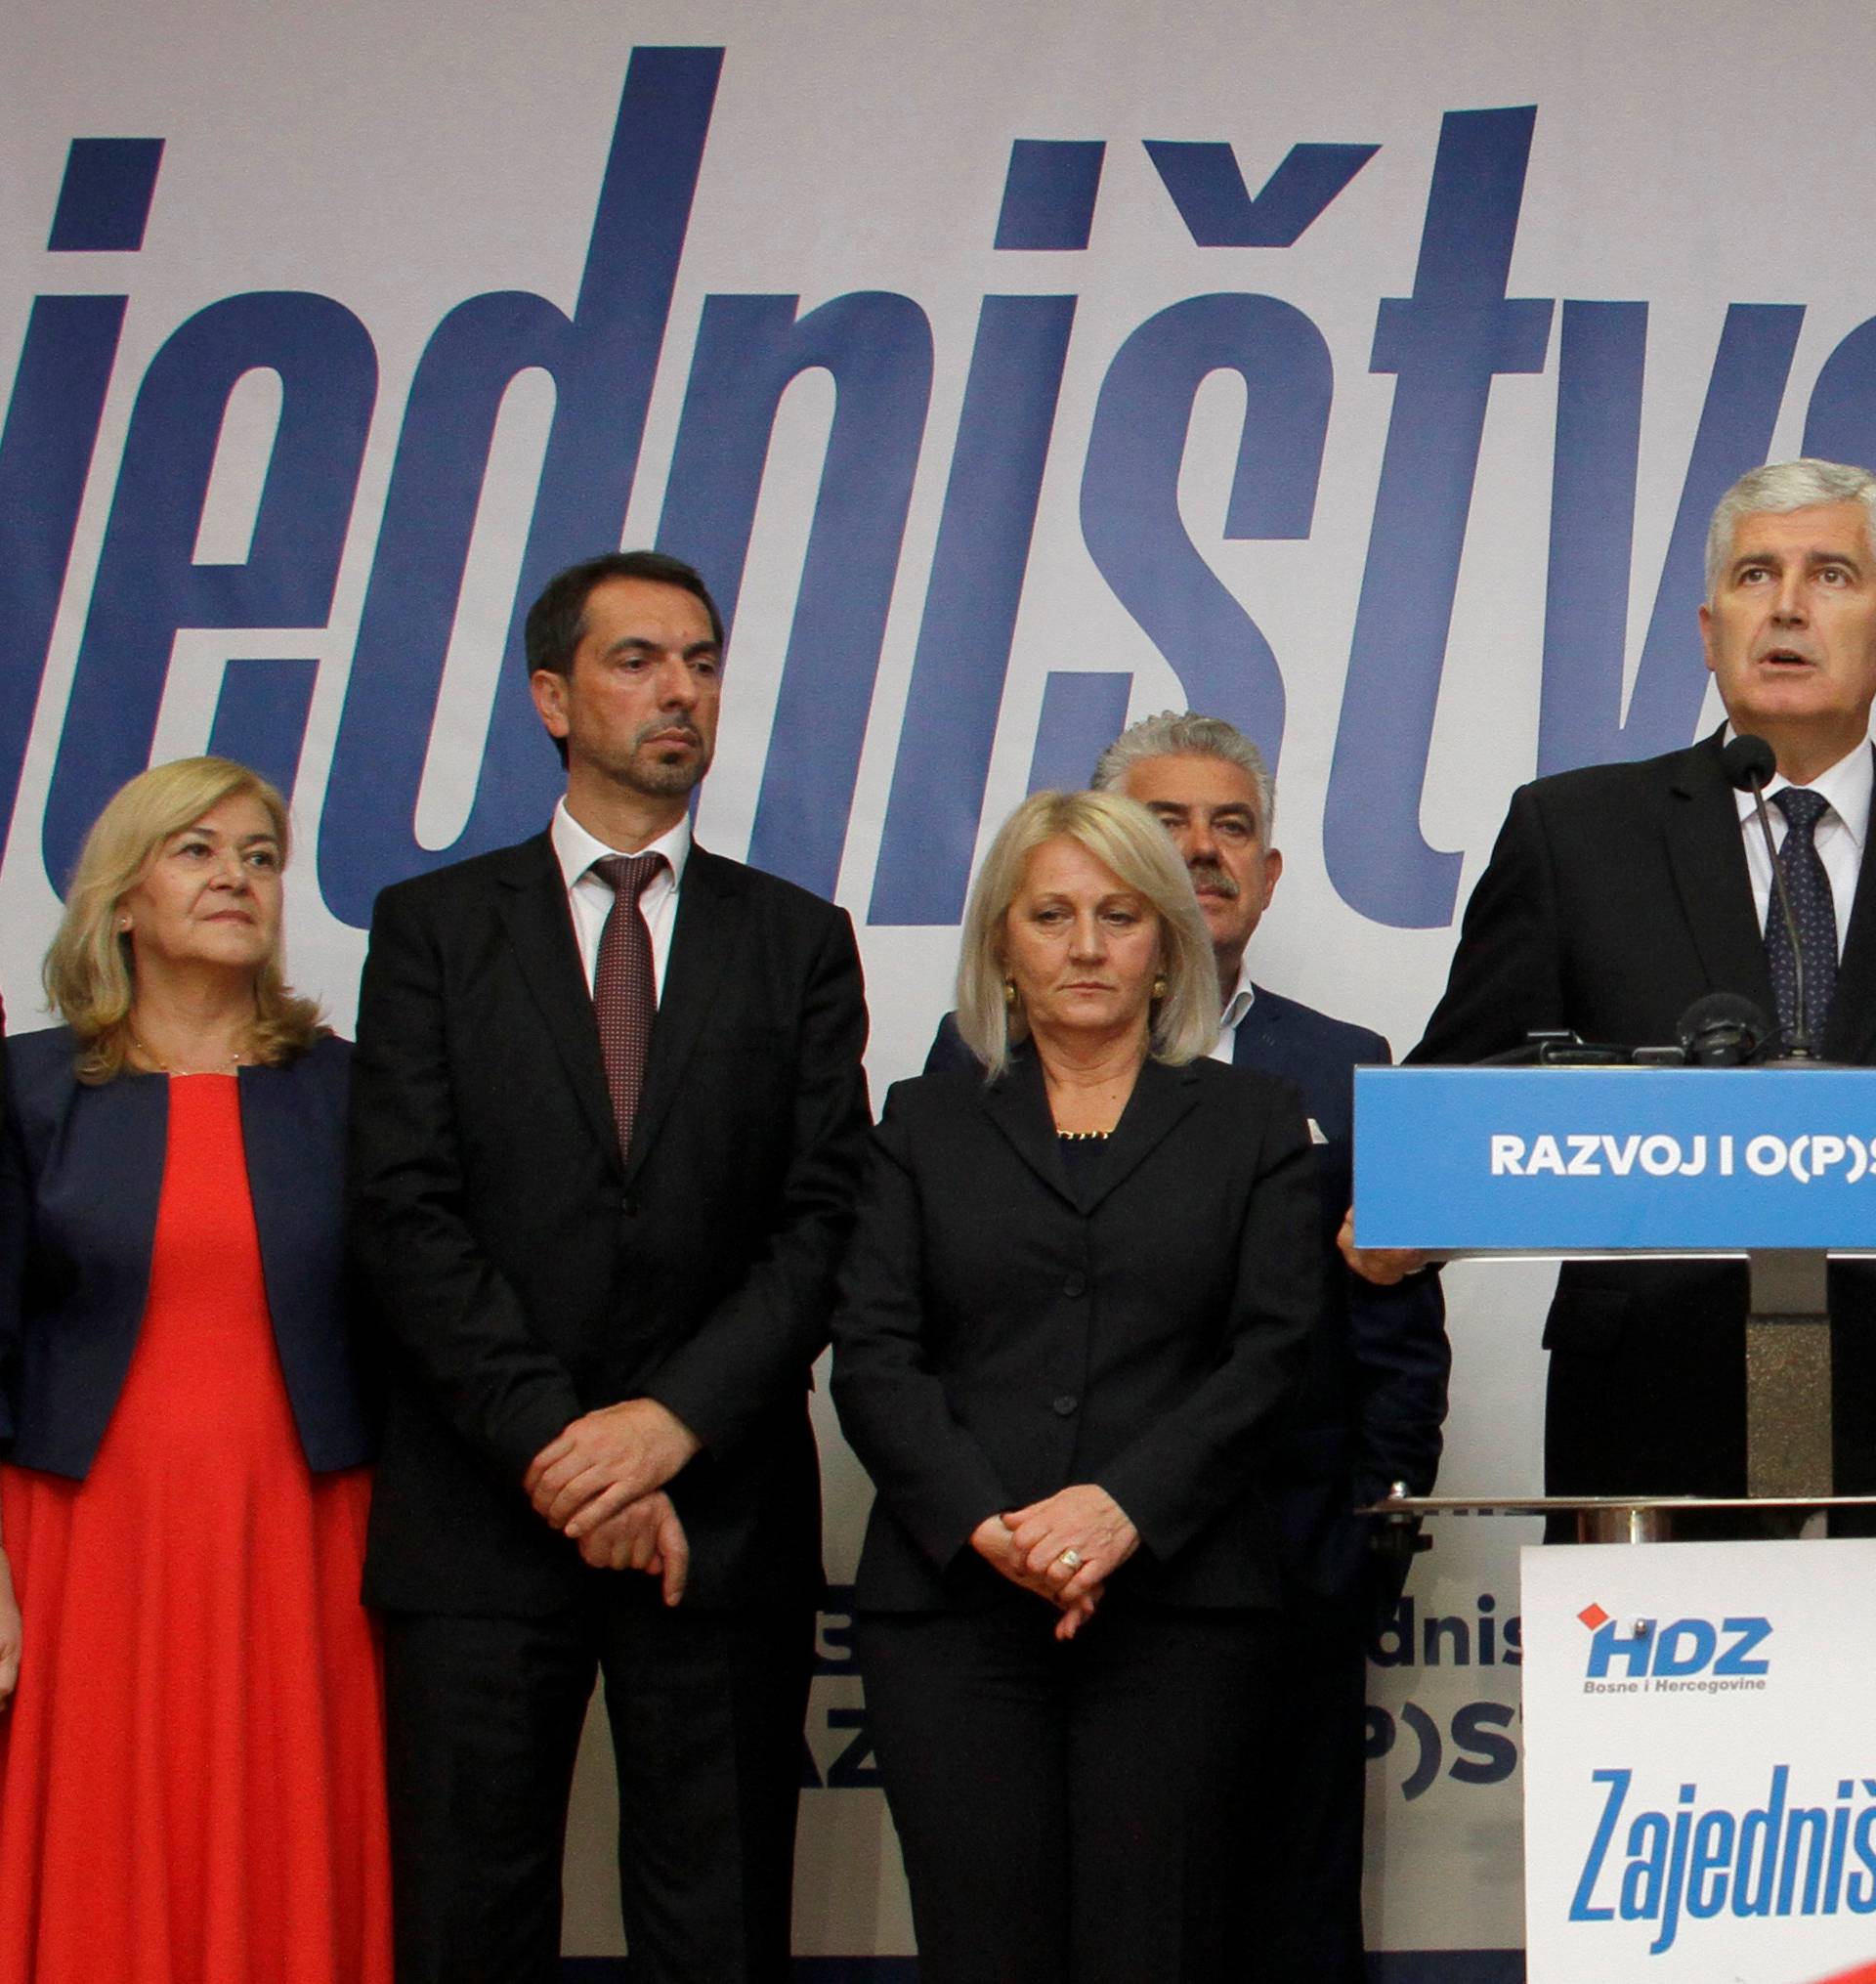 Dragan Covic, President of the Croatian Democratic Union (HDZ), attends a news conference in Mostar